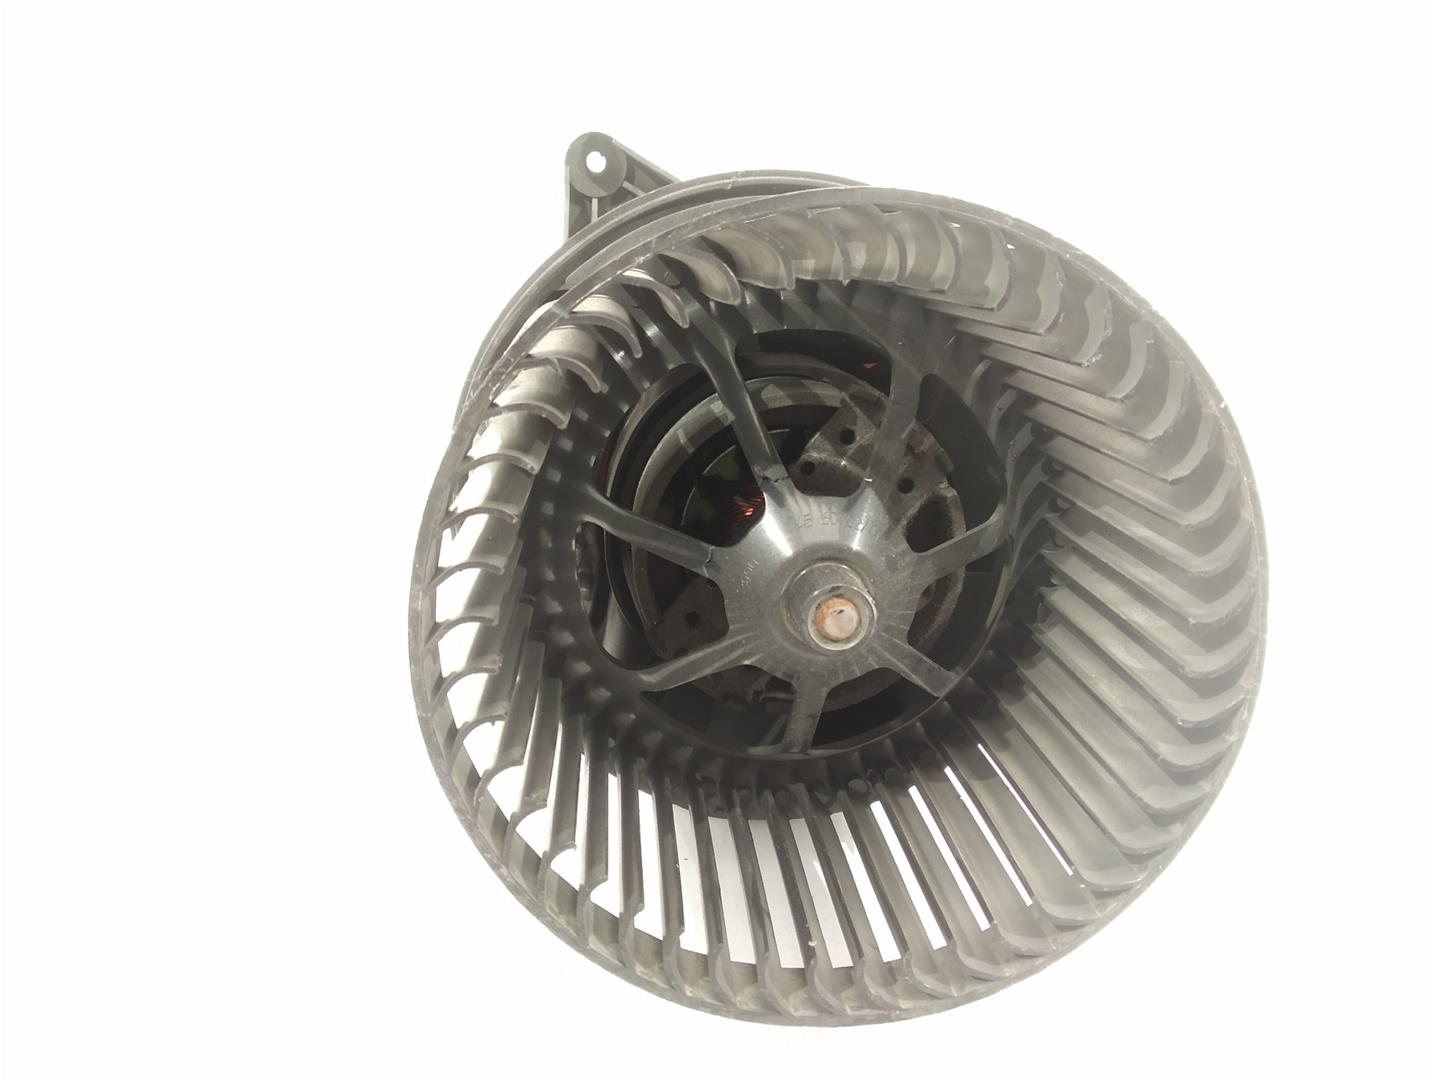 FORD Mondeo 3 generation (2000-2007) Heater Blower Fan 3S7H19E624AB, 3S7H19E624AB, 3S7H19E624AB 24514551